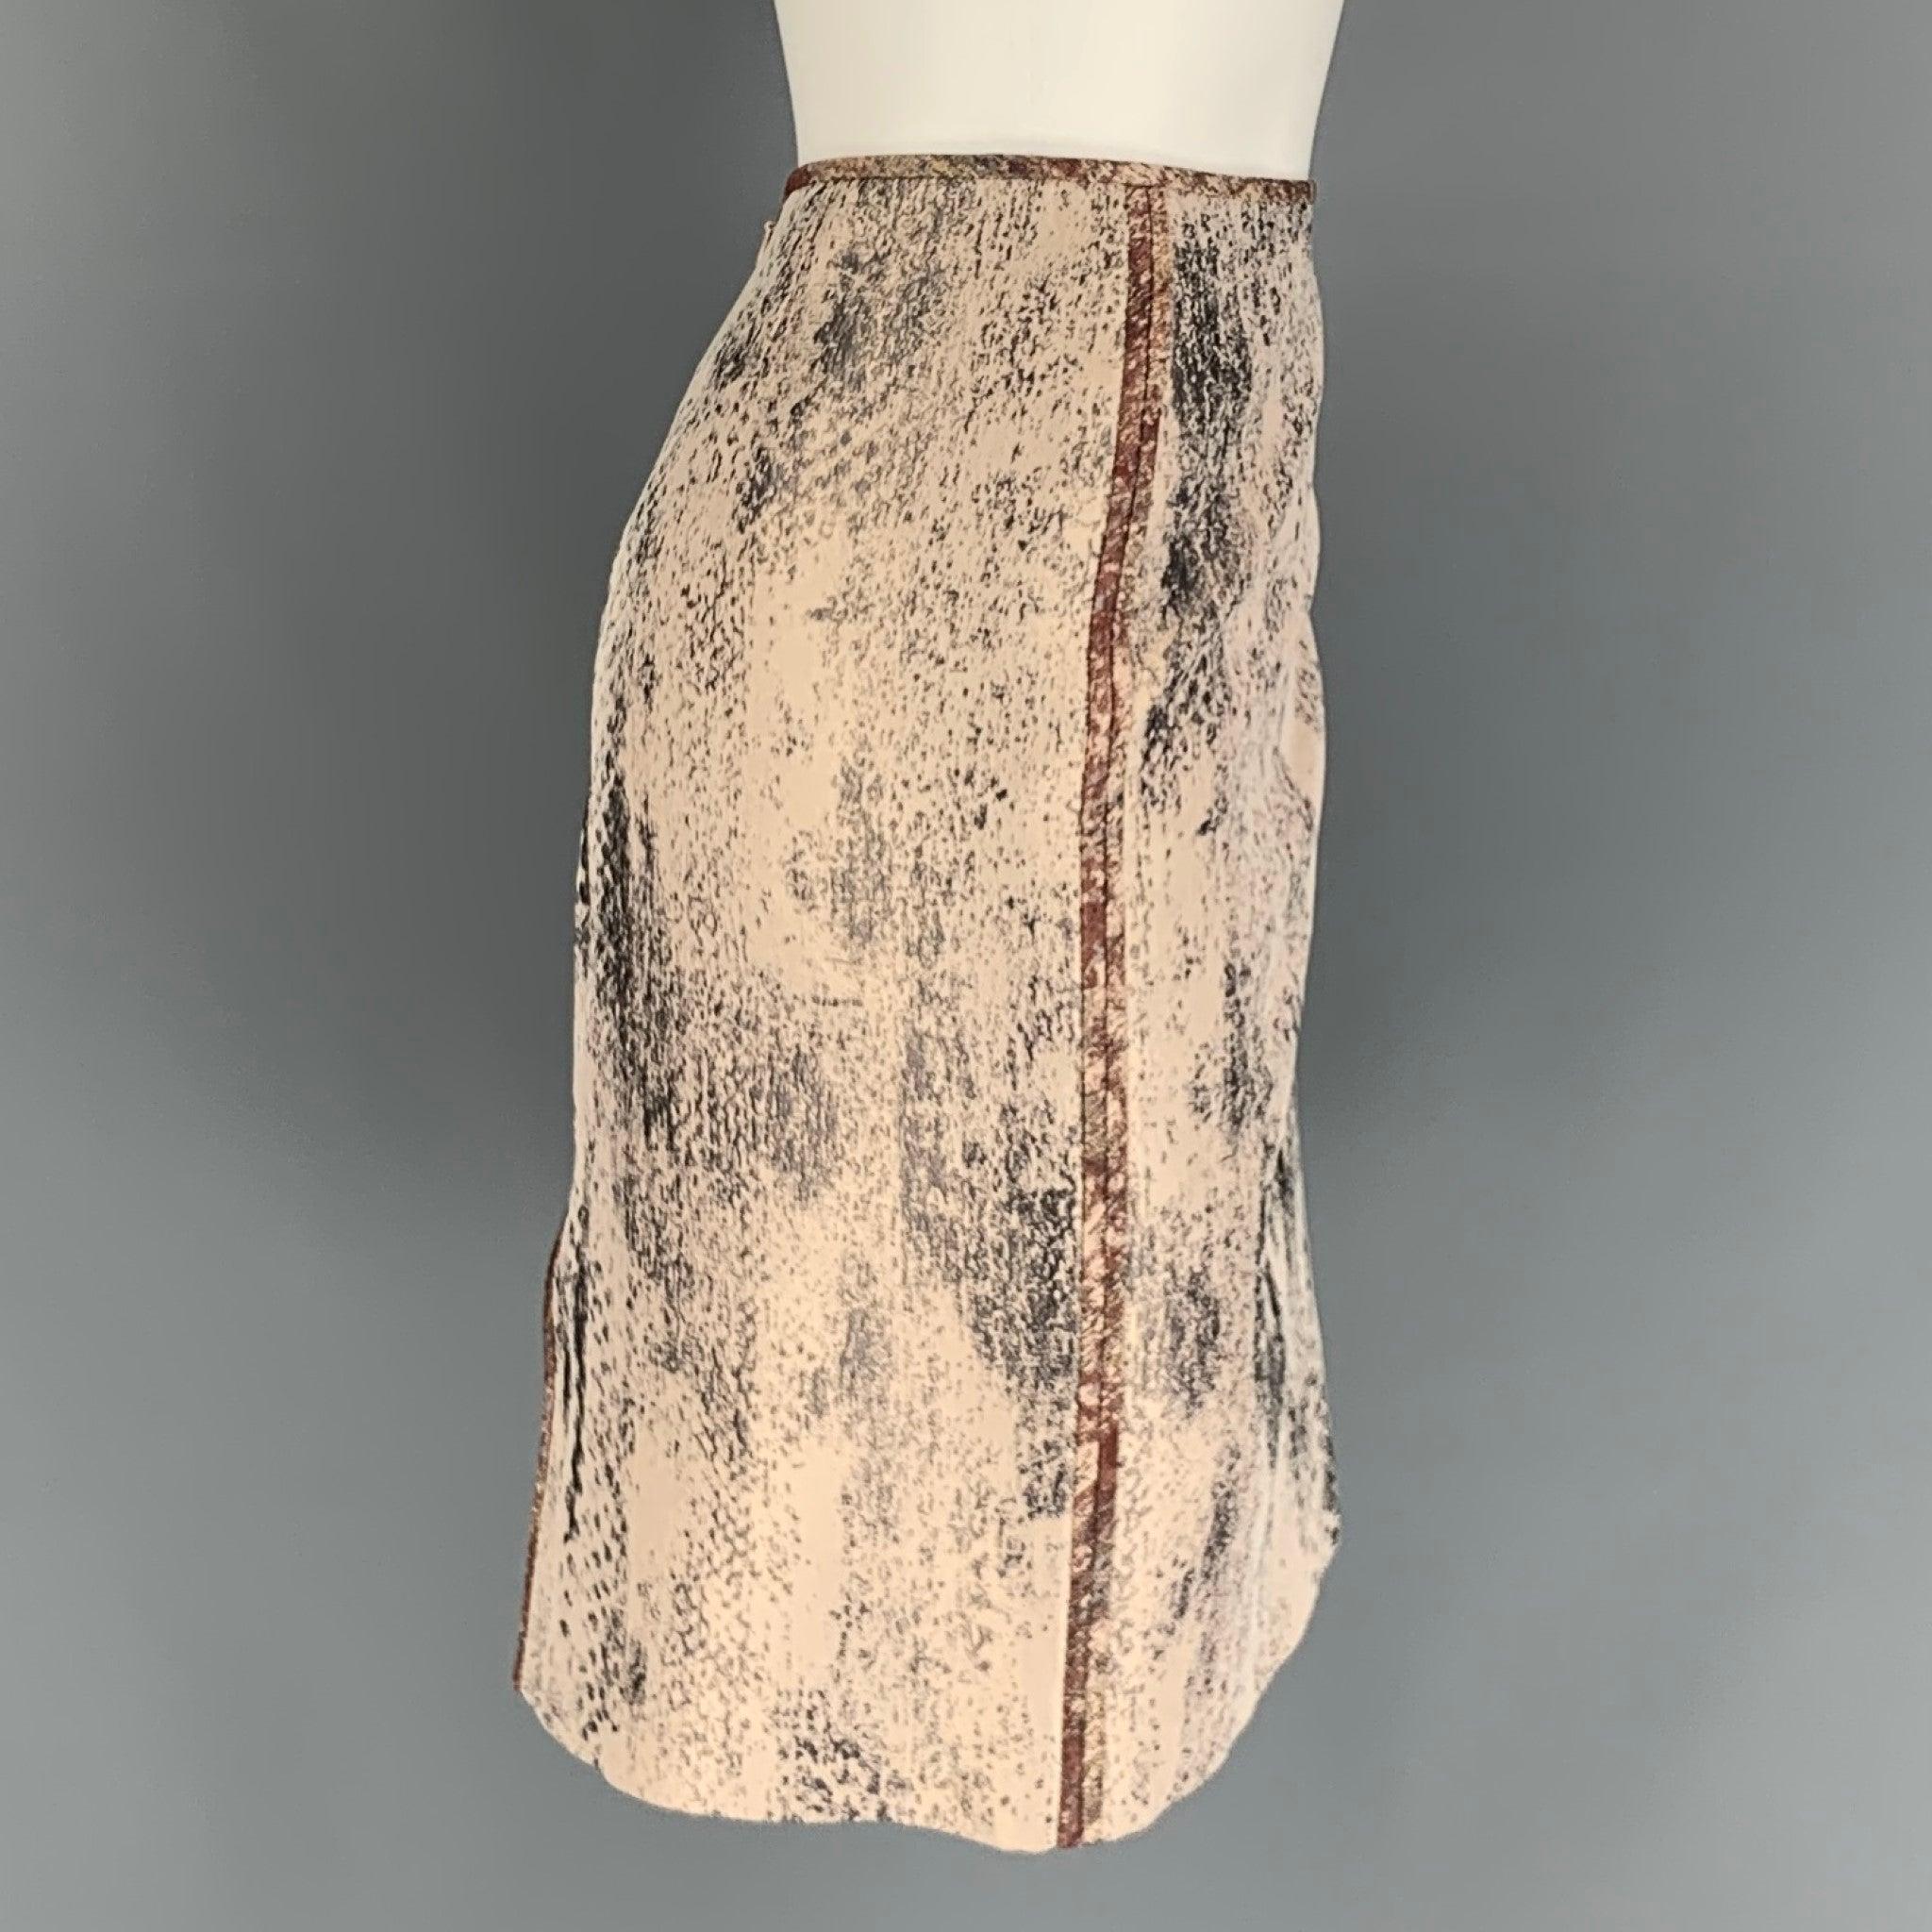 REED KRAKOFF skirt comes in a pink & silver marbled jacquard silk / viscose with a slip liner featuring a pencil style, back slit, and a zipper closure.
Very Good
Pre-Owned Condition. 

Marked:   6 

Measurements: 
  Waist: 32 inches  Hip: 38 inches